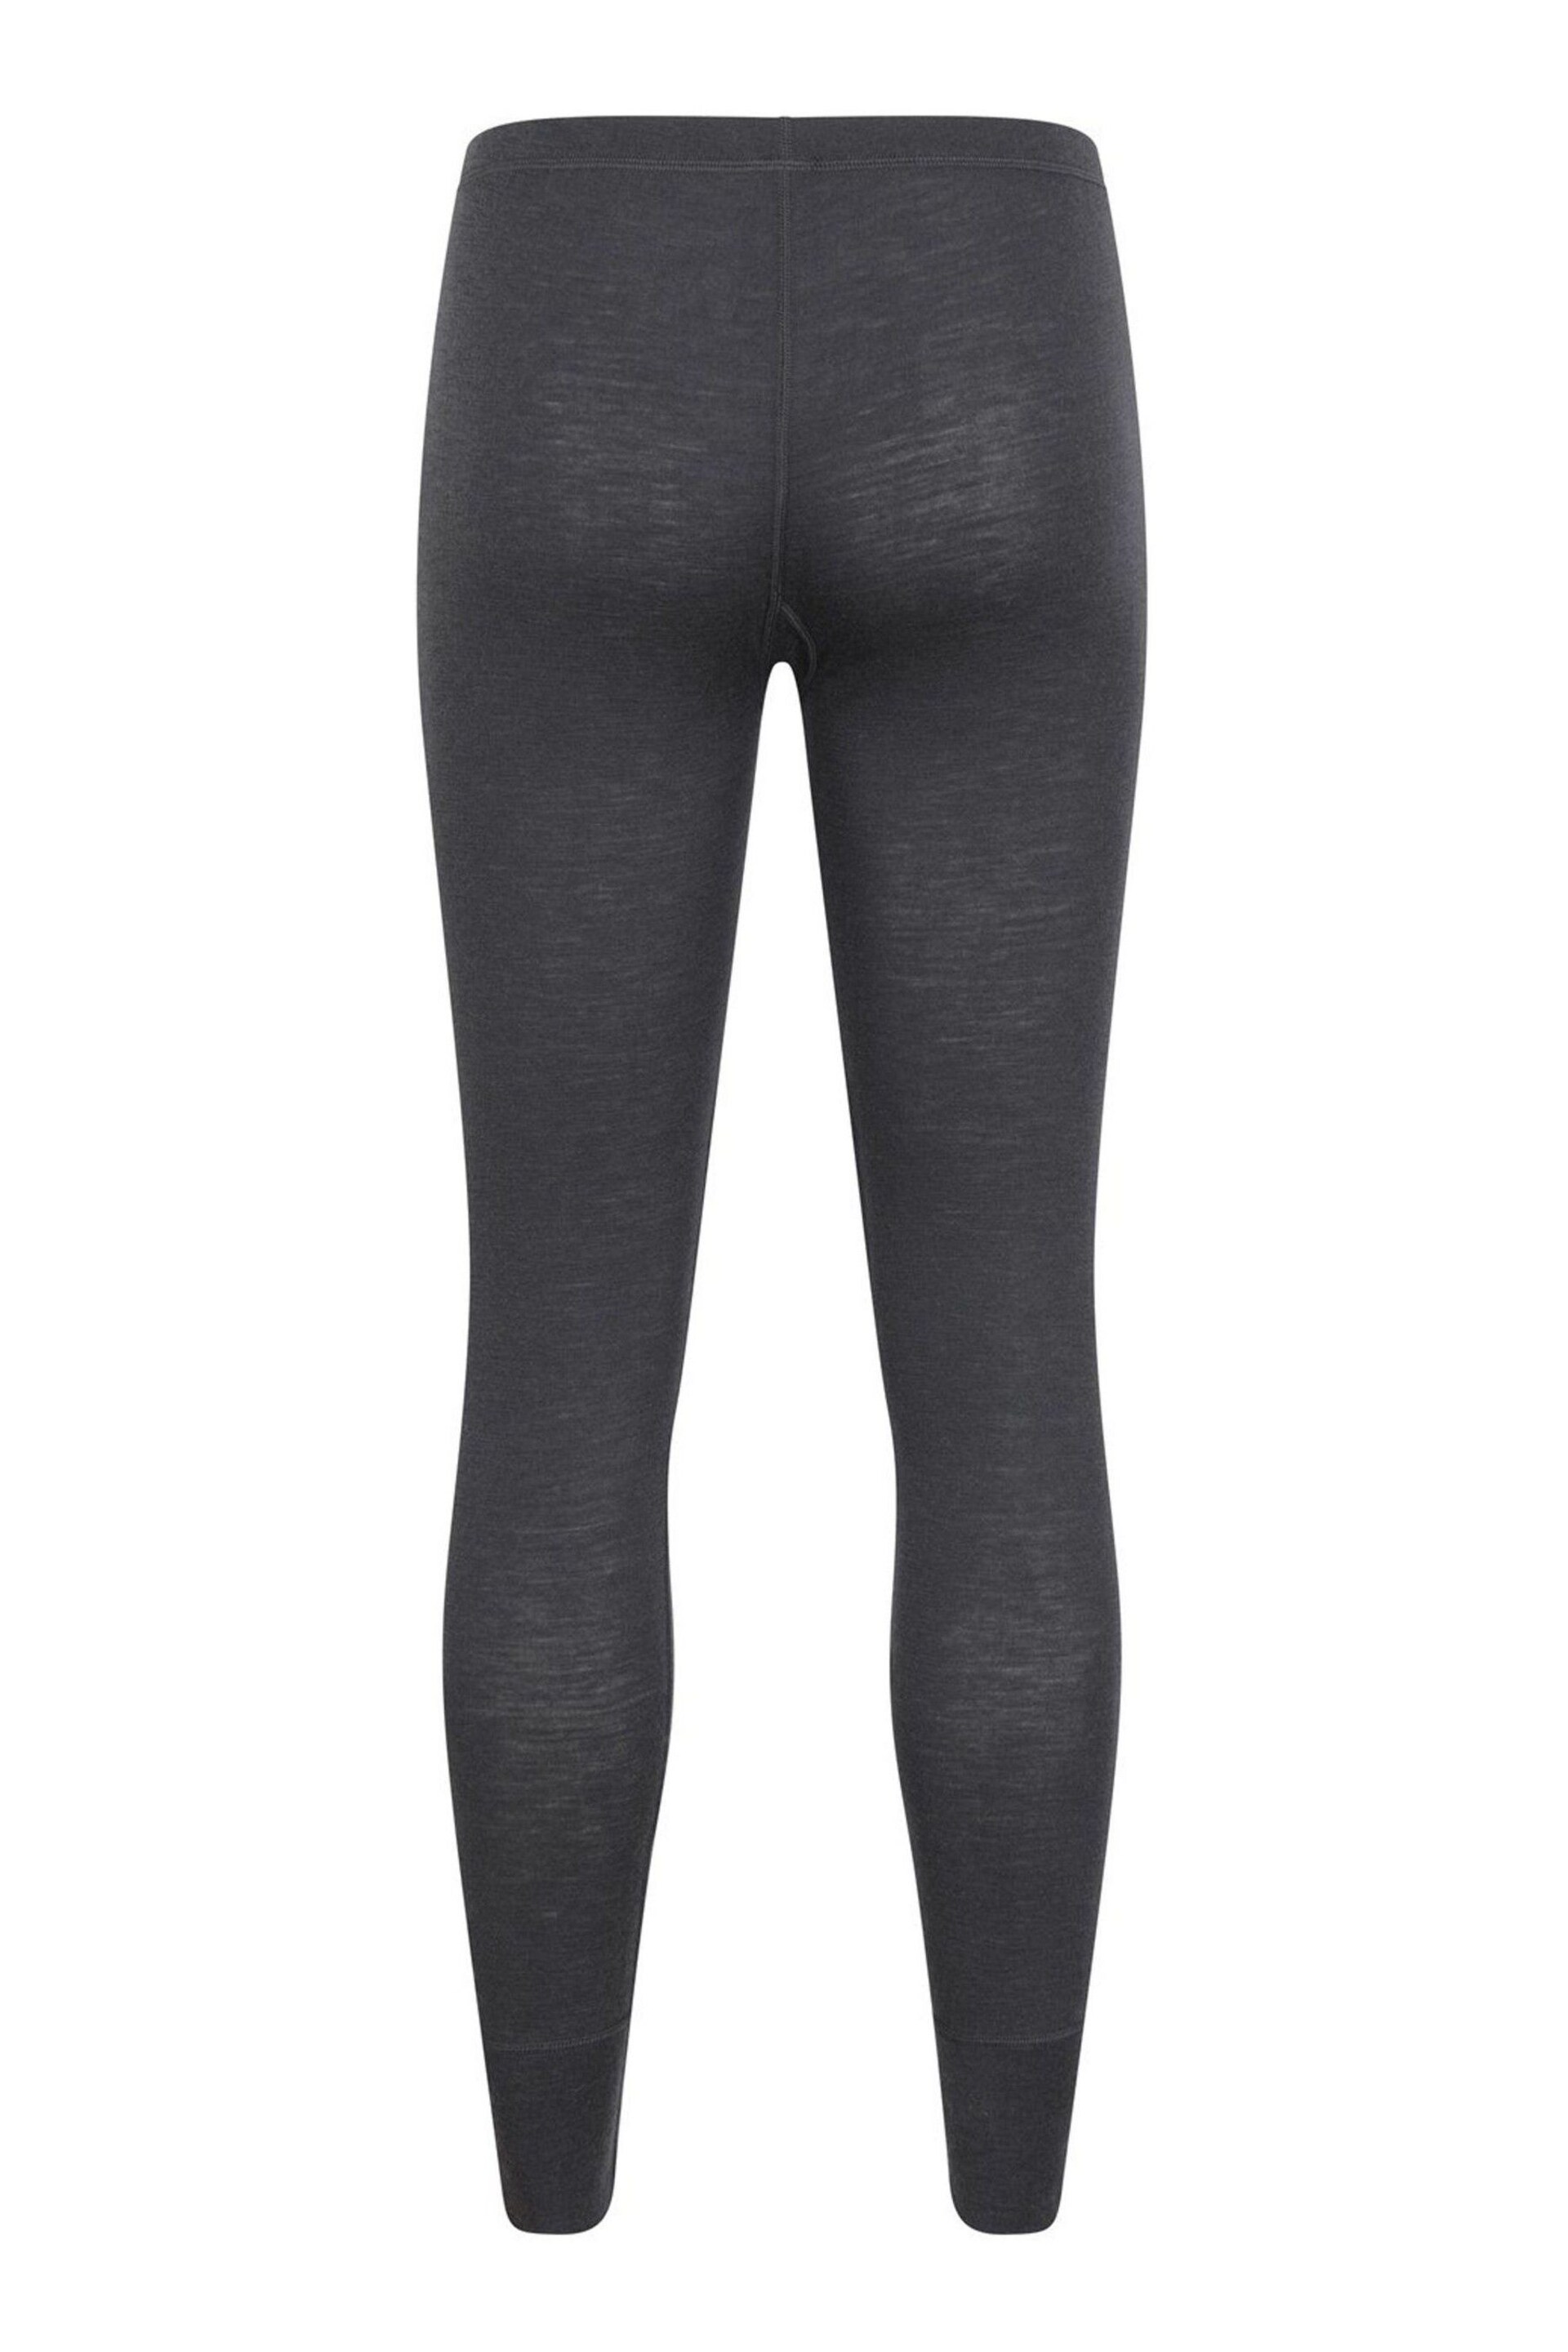 Mountain Warehouse Grey Merino Thermal Pants with Fly -  Mens - Image 3 of 3